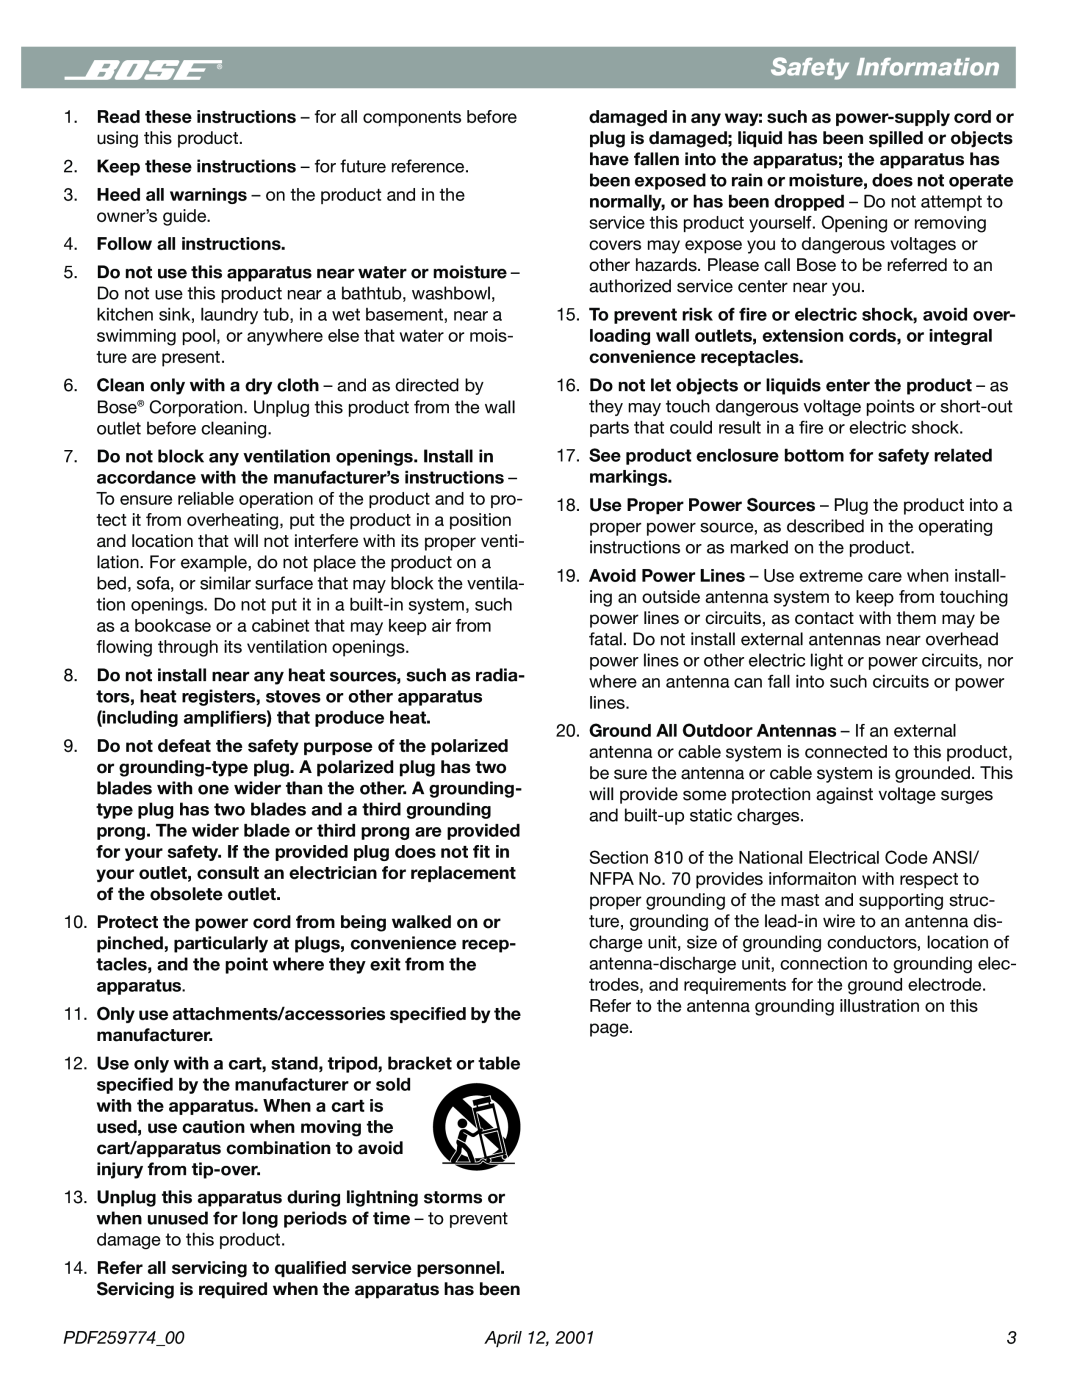 Bose PDF259774_00 manual Safety Information, Keep these instructions - for future reference 